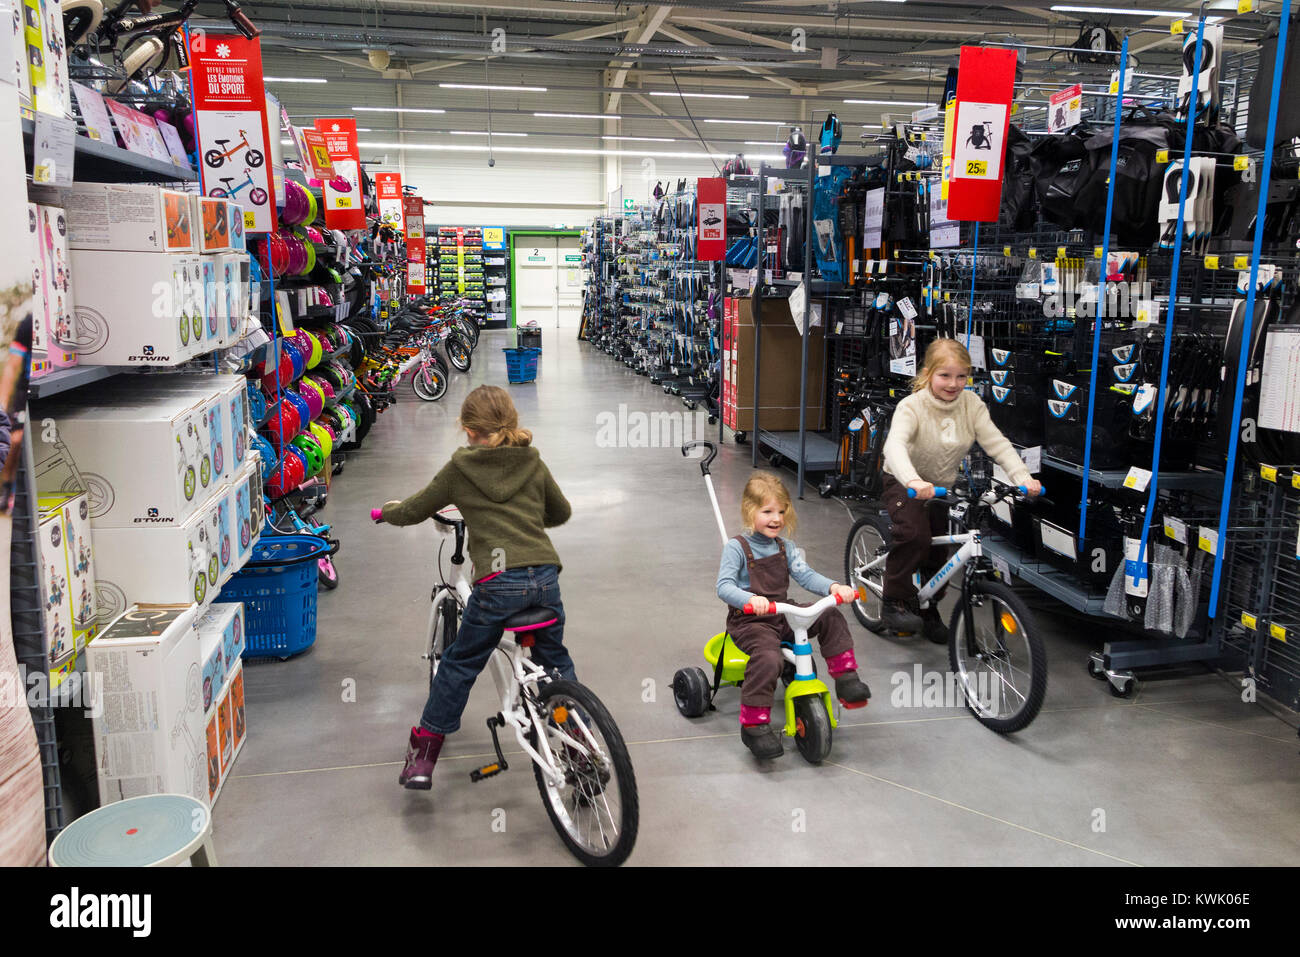 Decathlon Store High Resolution Stock Photography and Images - Alamy